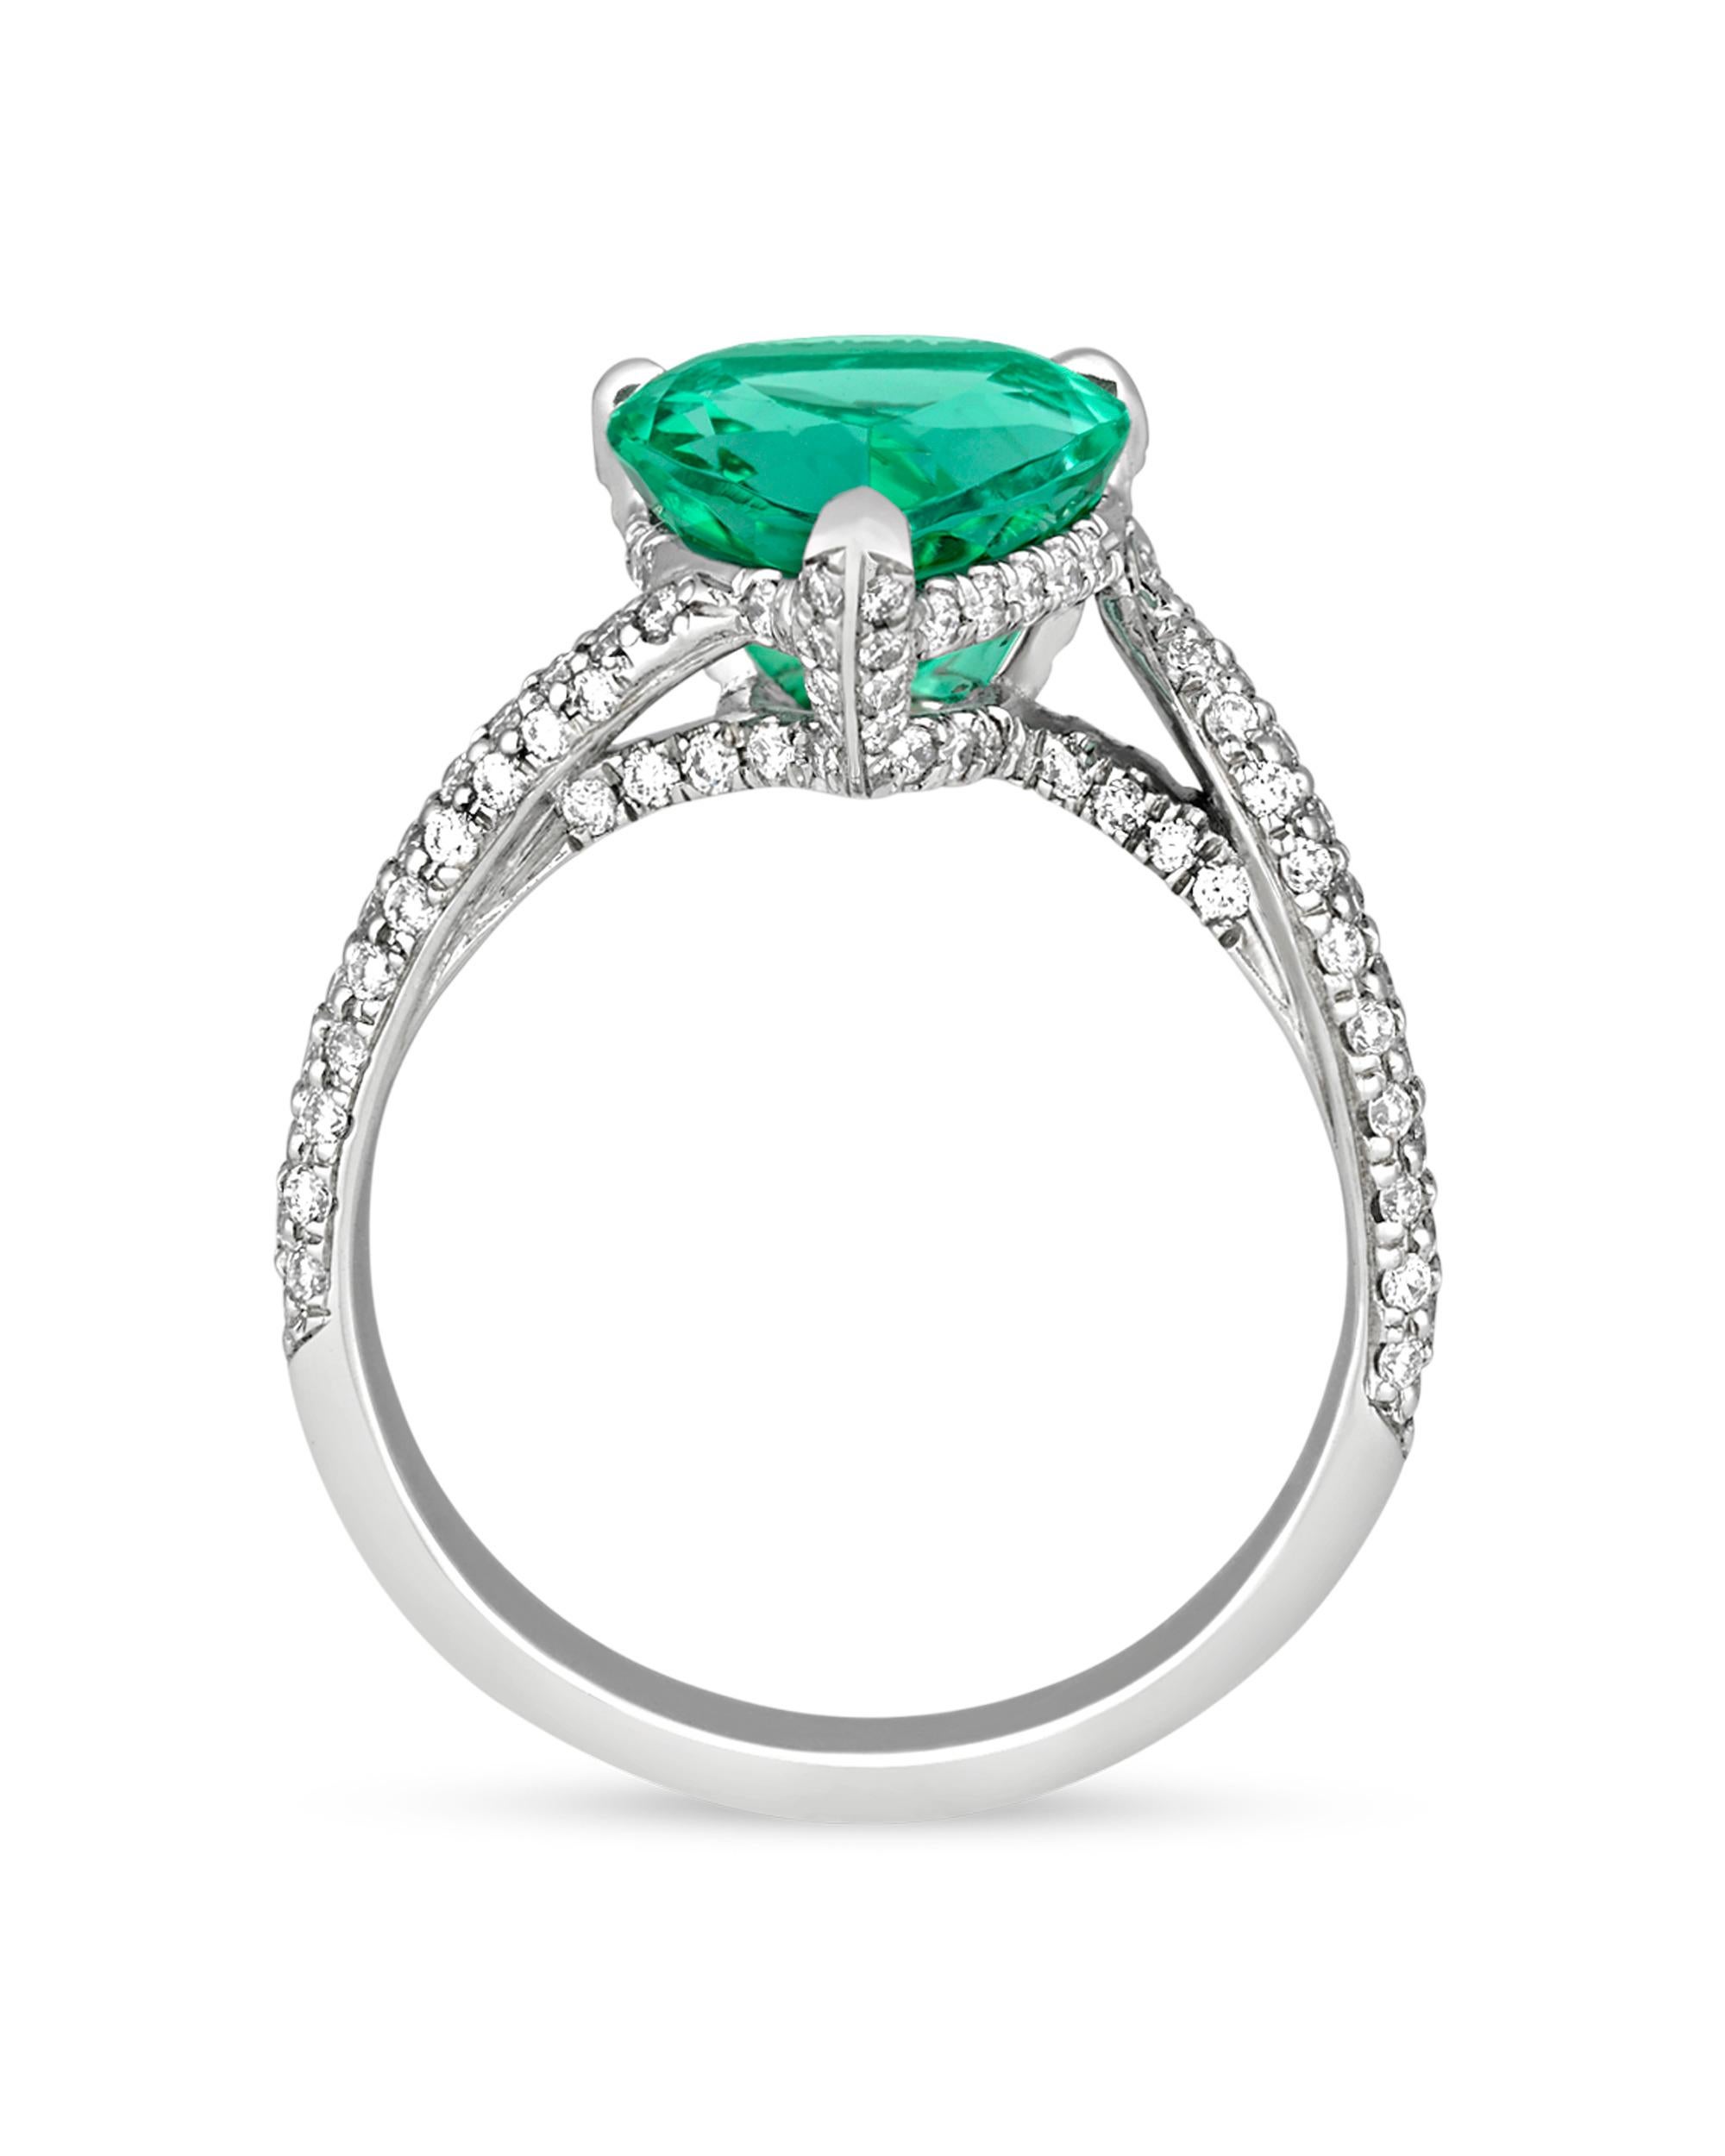 An electric green 3.35-carat pear-shaped Paraiba tourmaline stars in this ring. First discovered in 1989, the Paraiba tourmaline is one of the world’s rarest and most vibrant gemstones. These extraordinary stones have only been found in the